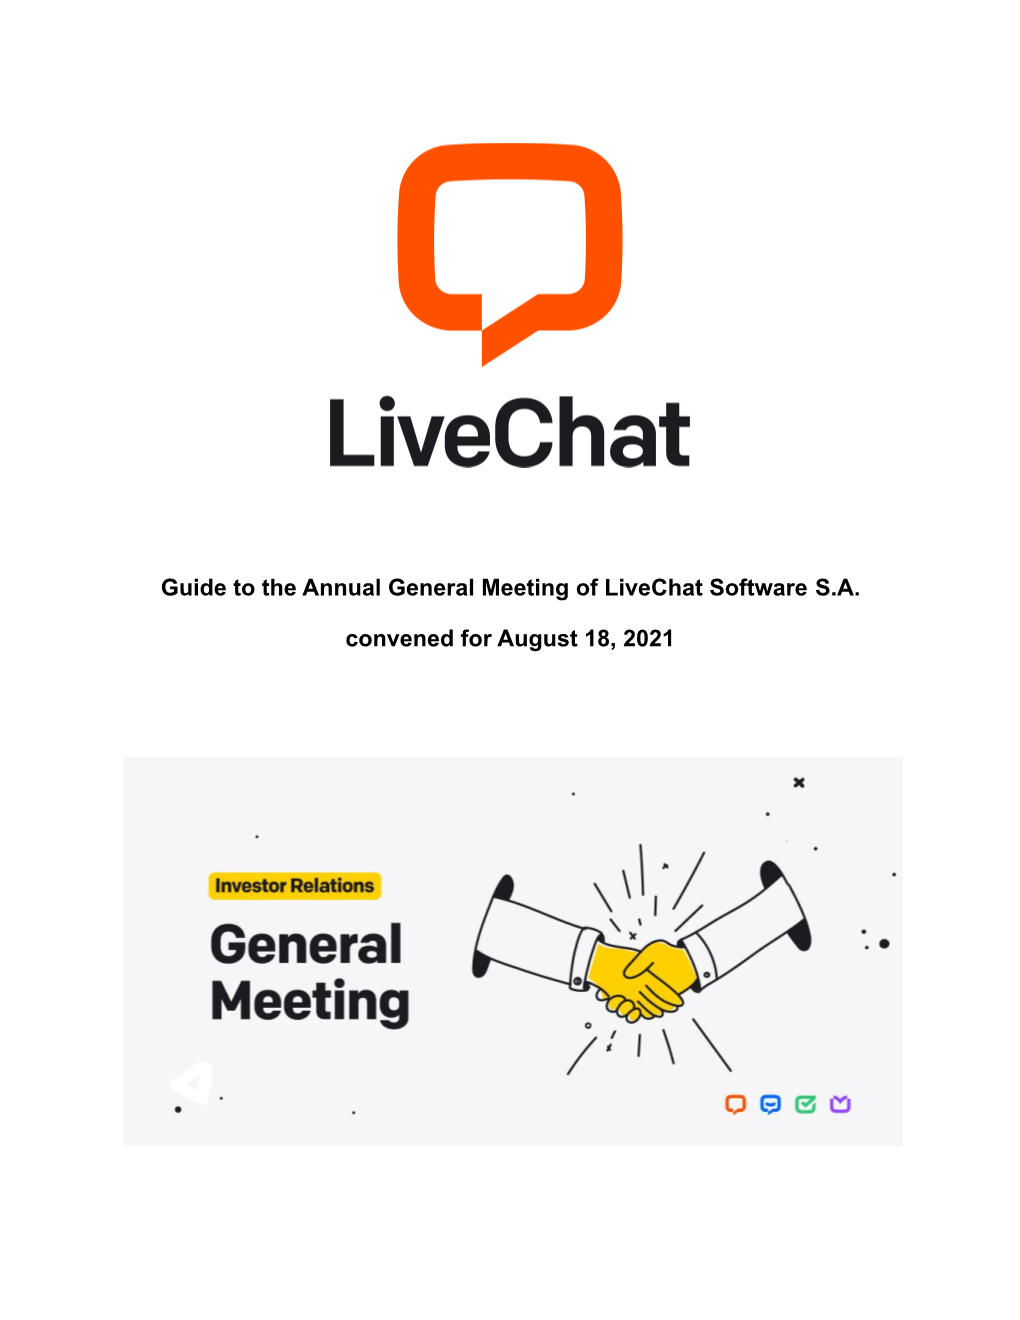 Guide to the General Meeting of Livechat Software S.A